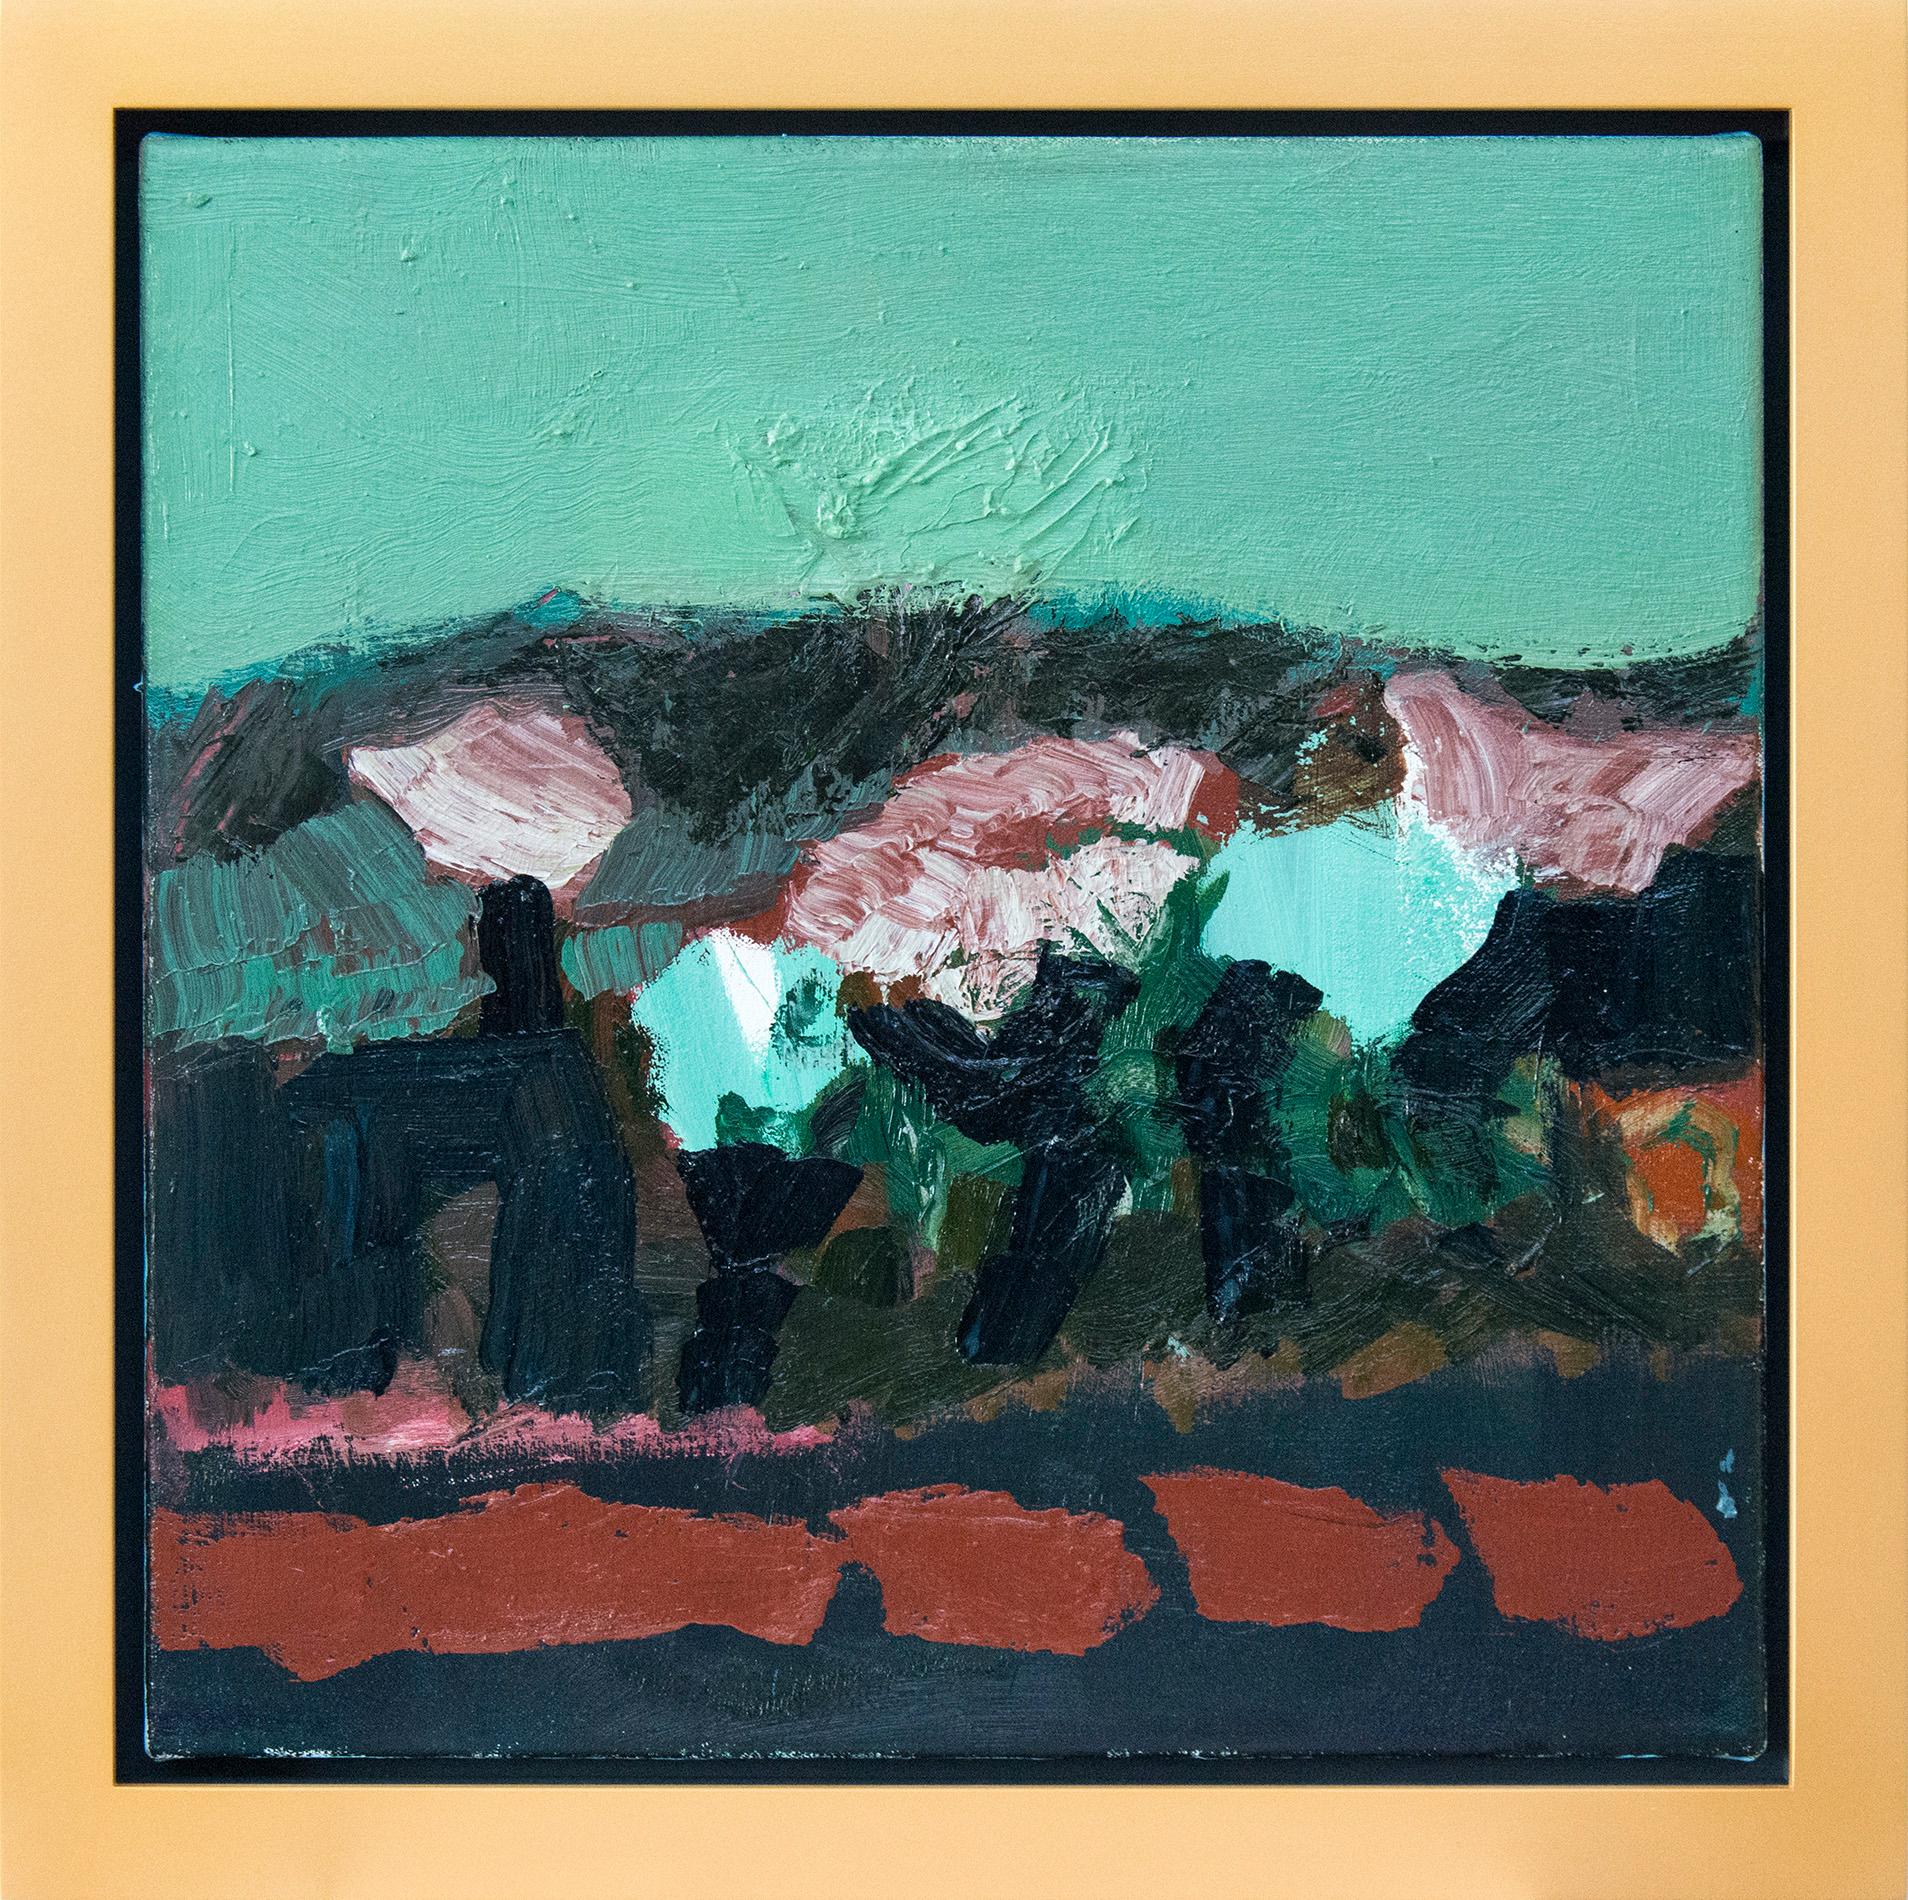 Going by Trees in Spring - small teal green, blue, red, abstract landscape oil